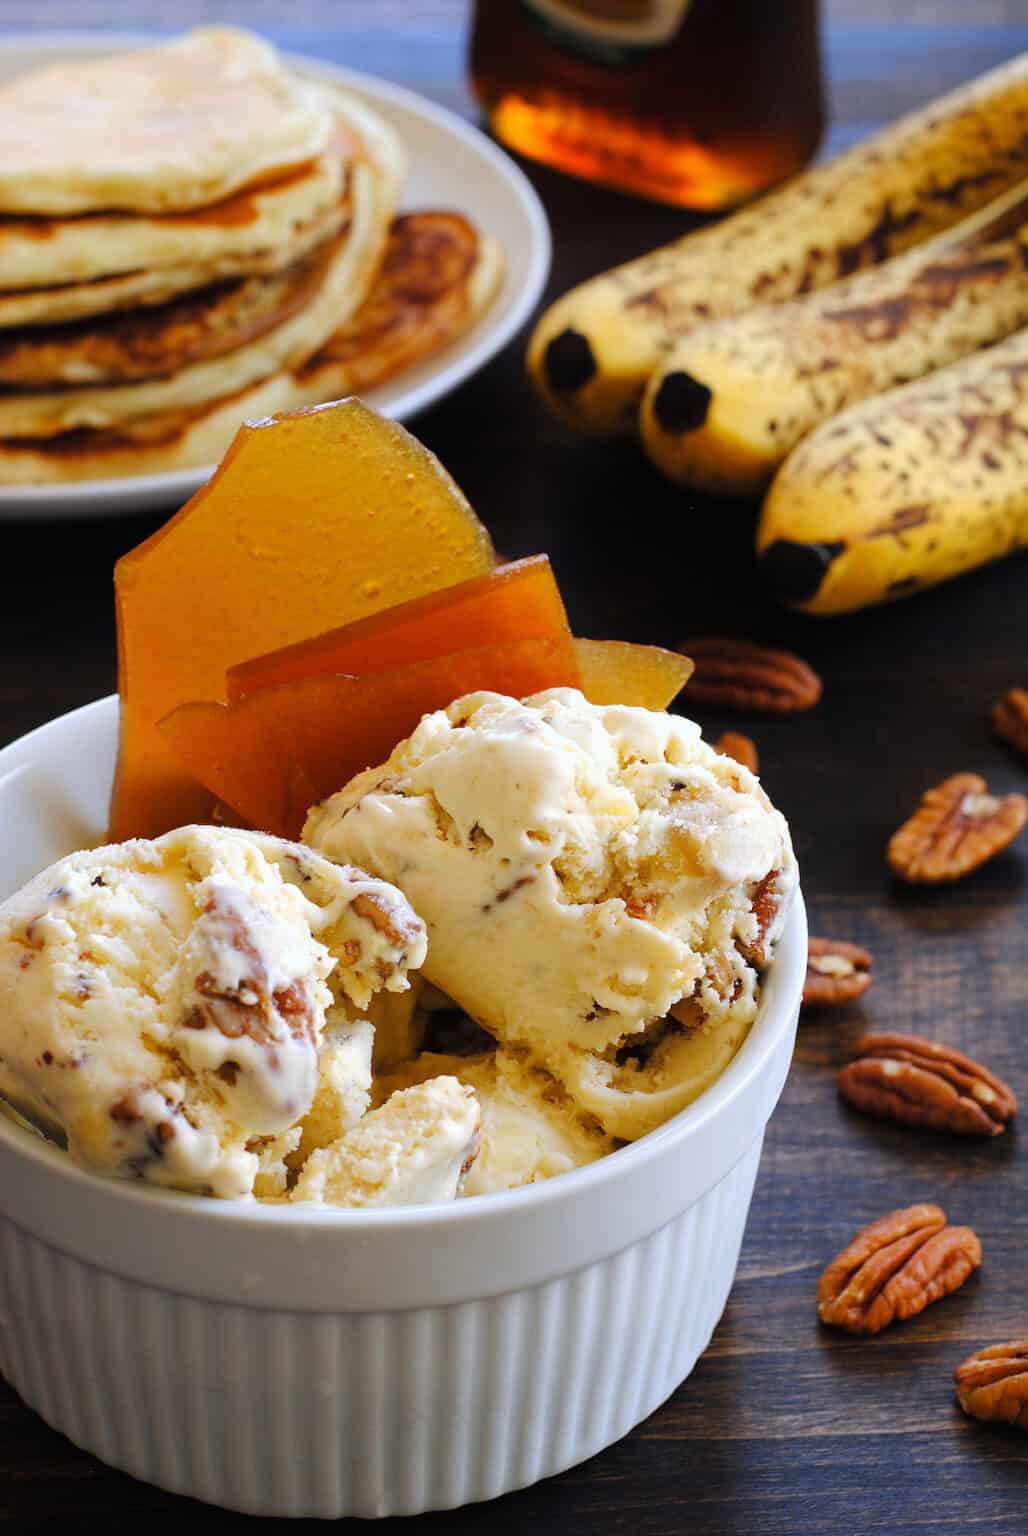 Banana pancake ice cream with maple brittle and bananas, pecans, and pancakes in the background.